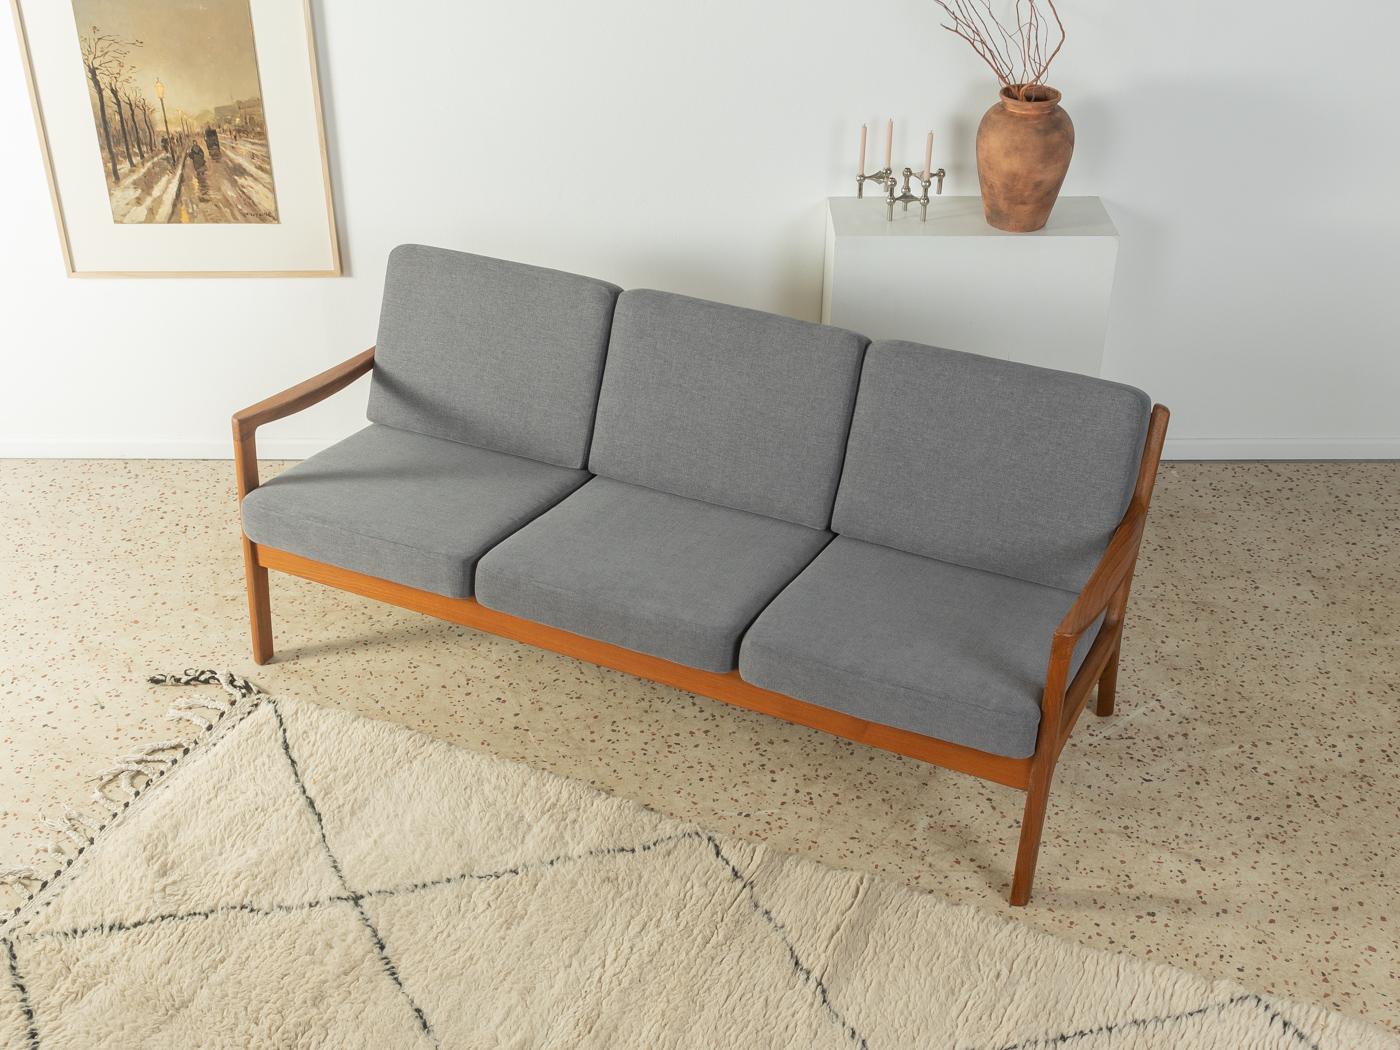 Classic 3-seater-sofa from the 1960s. Model Senator by Ole Wanscher for CADO. High-quality solid teak frame. The sofa has been reupholstered and covered with a high-quality gray upholstery fabric.

Quality Features:
 accomplished design: perfect